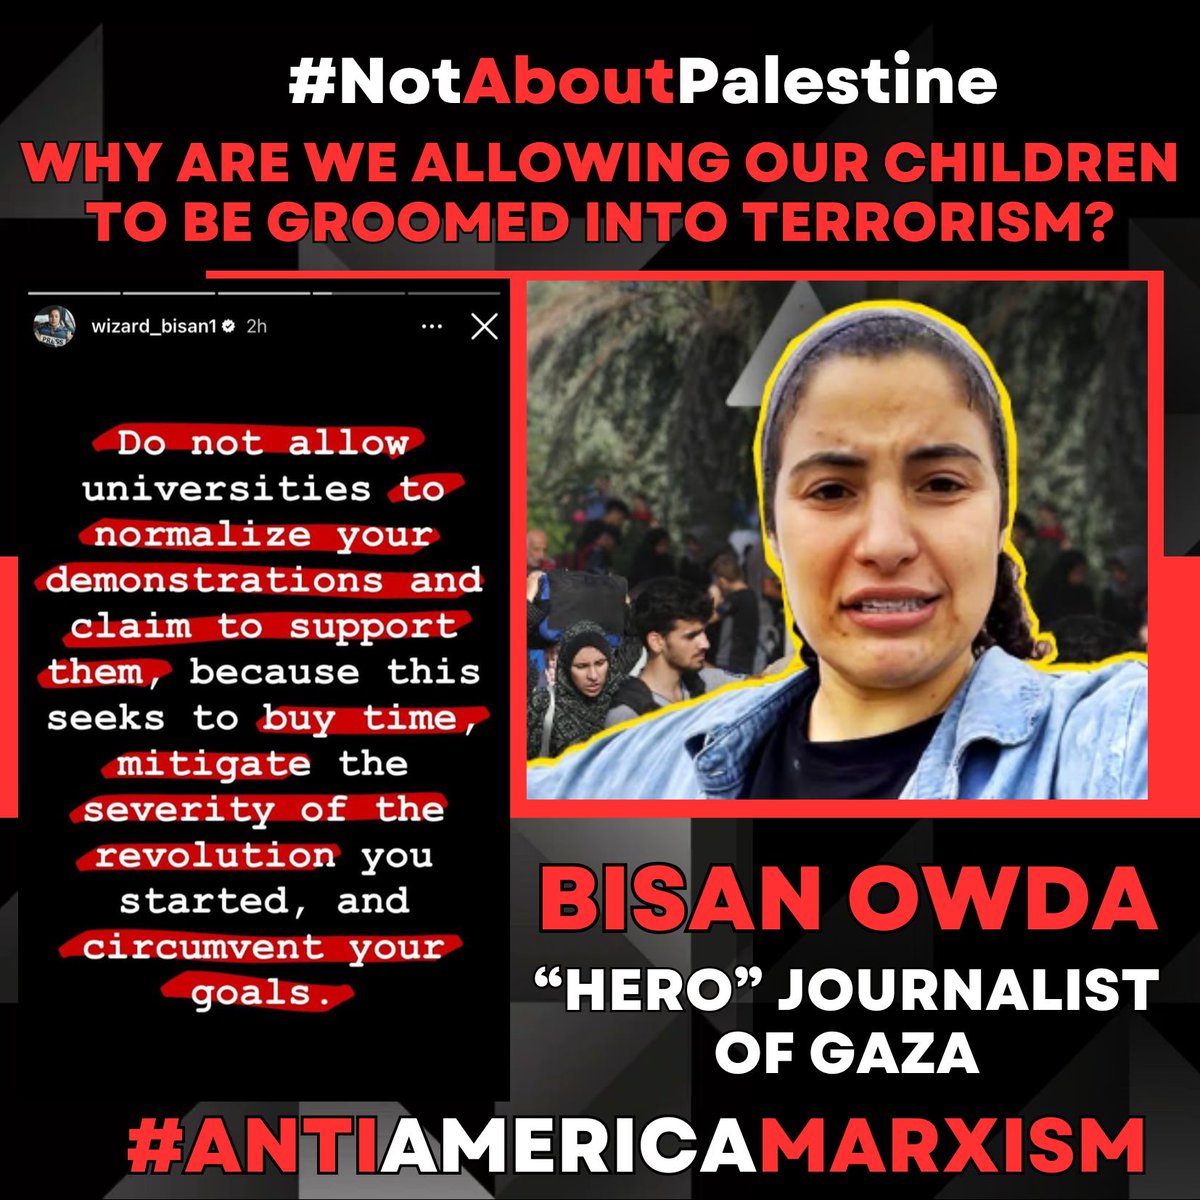 Wonder who is giving the advise to the terrorist in training? Bisan Owda, another 'Hero Journalist' of Gaza who took $400K from people who donated thinking it was for the people but turned out to be for herself, now nominated for a Peabody Award for journalism.. @PeabodyAwards